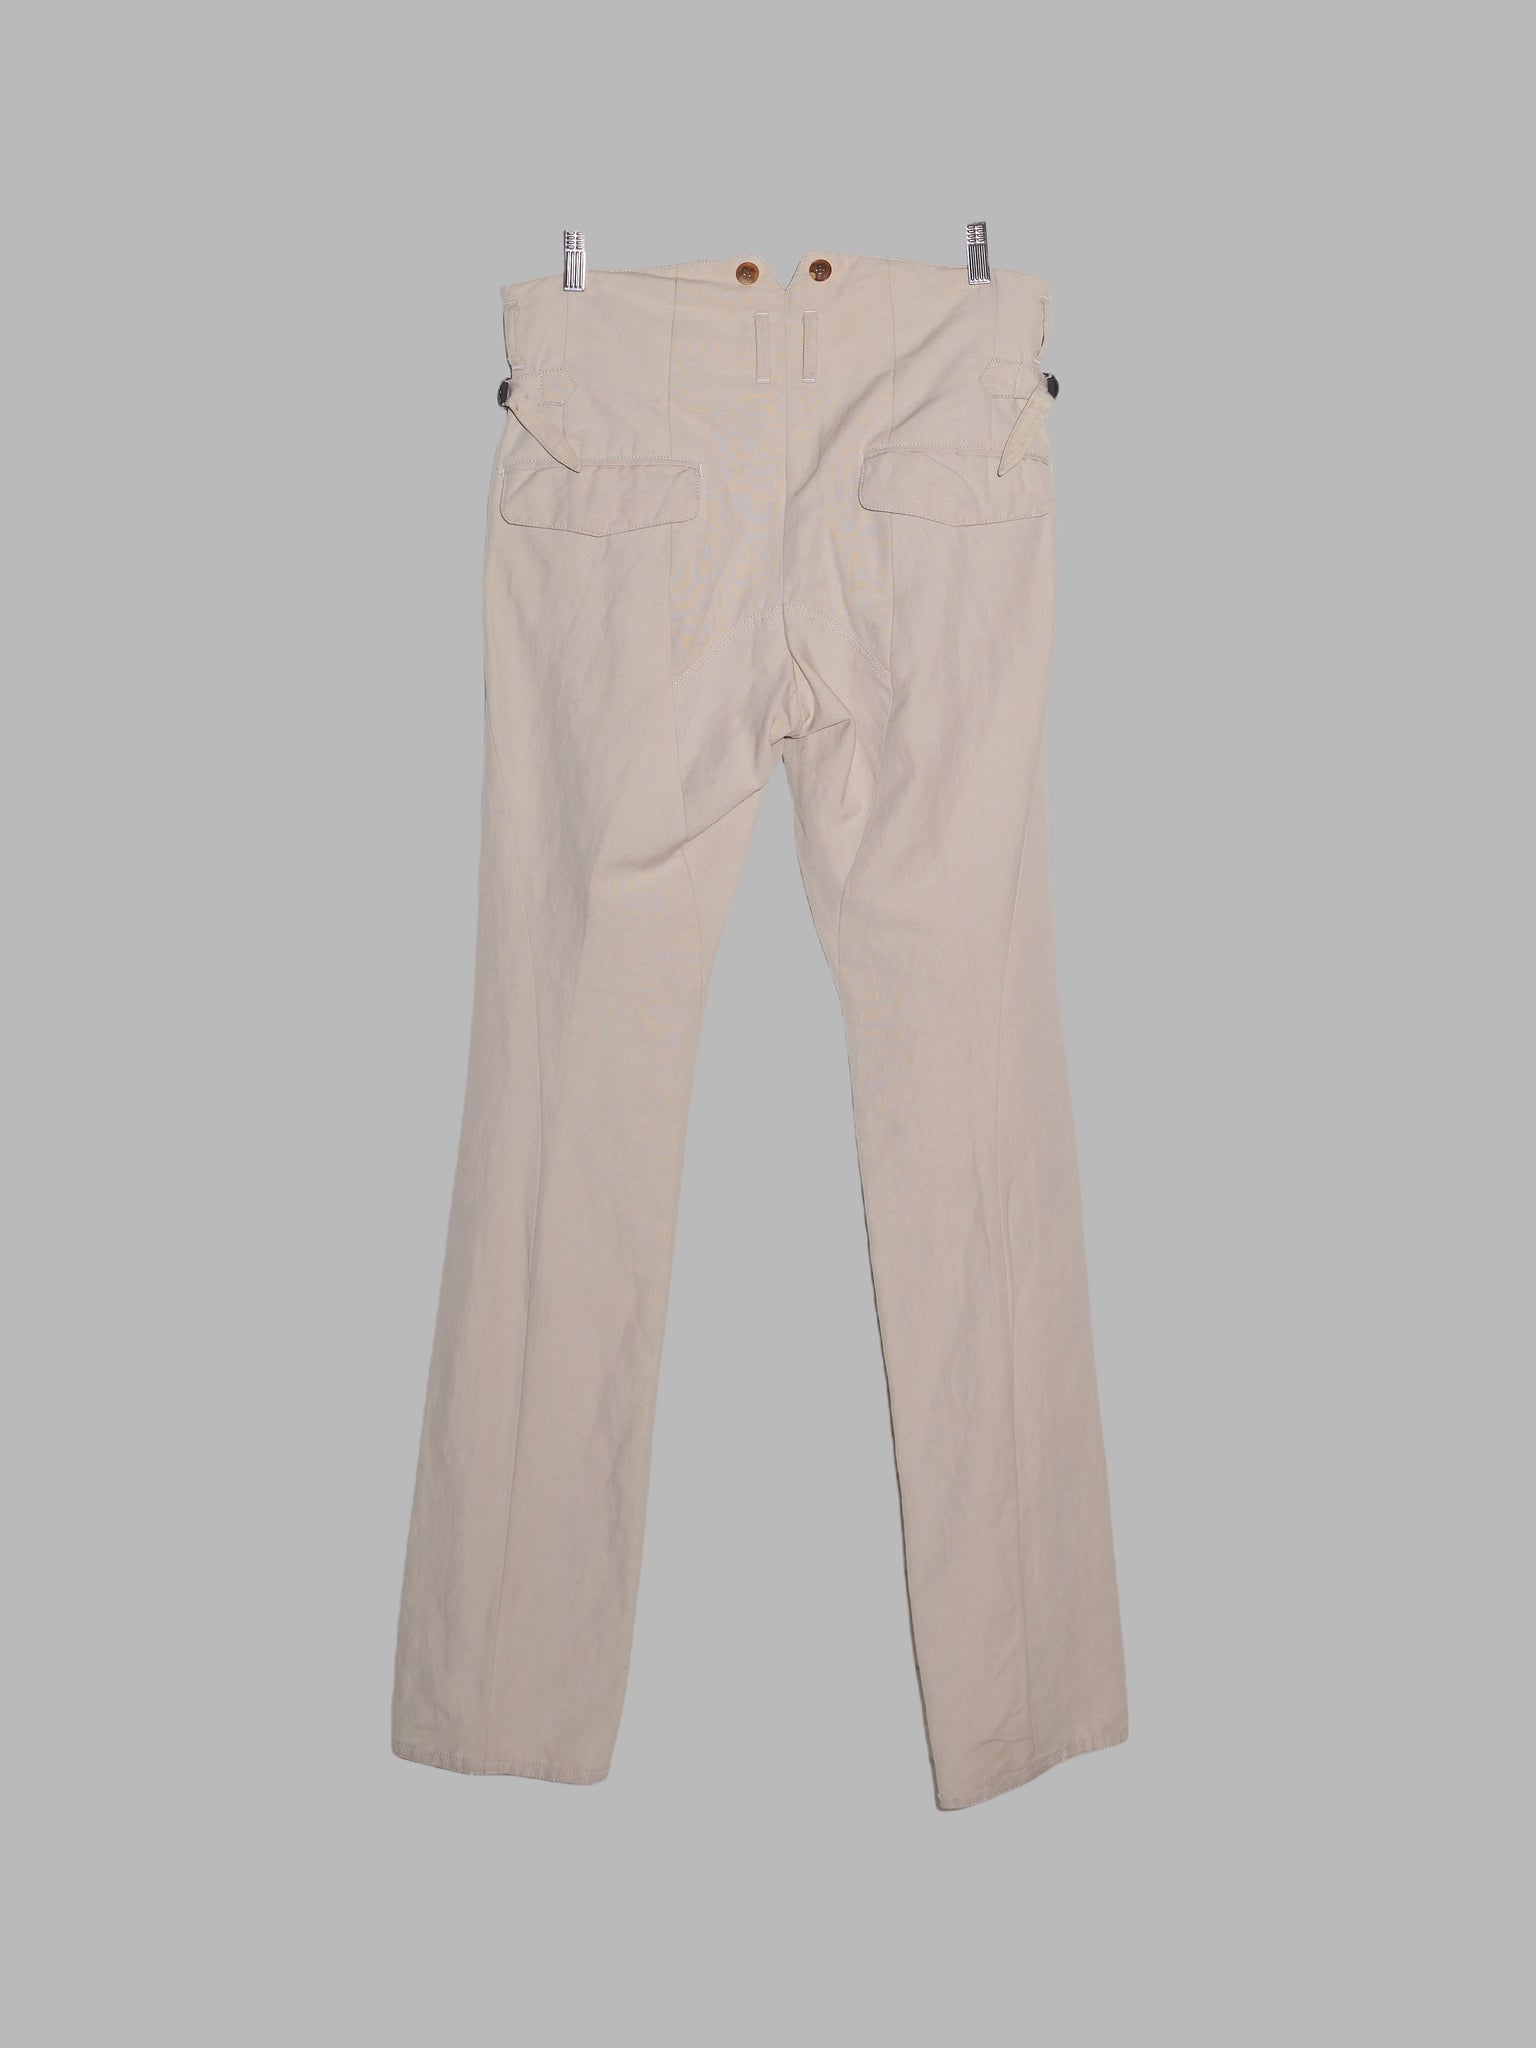 The Viridi-Anne beige off white ramie panelled side tab trousers